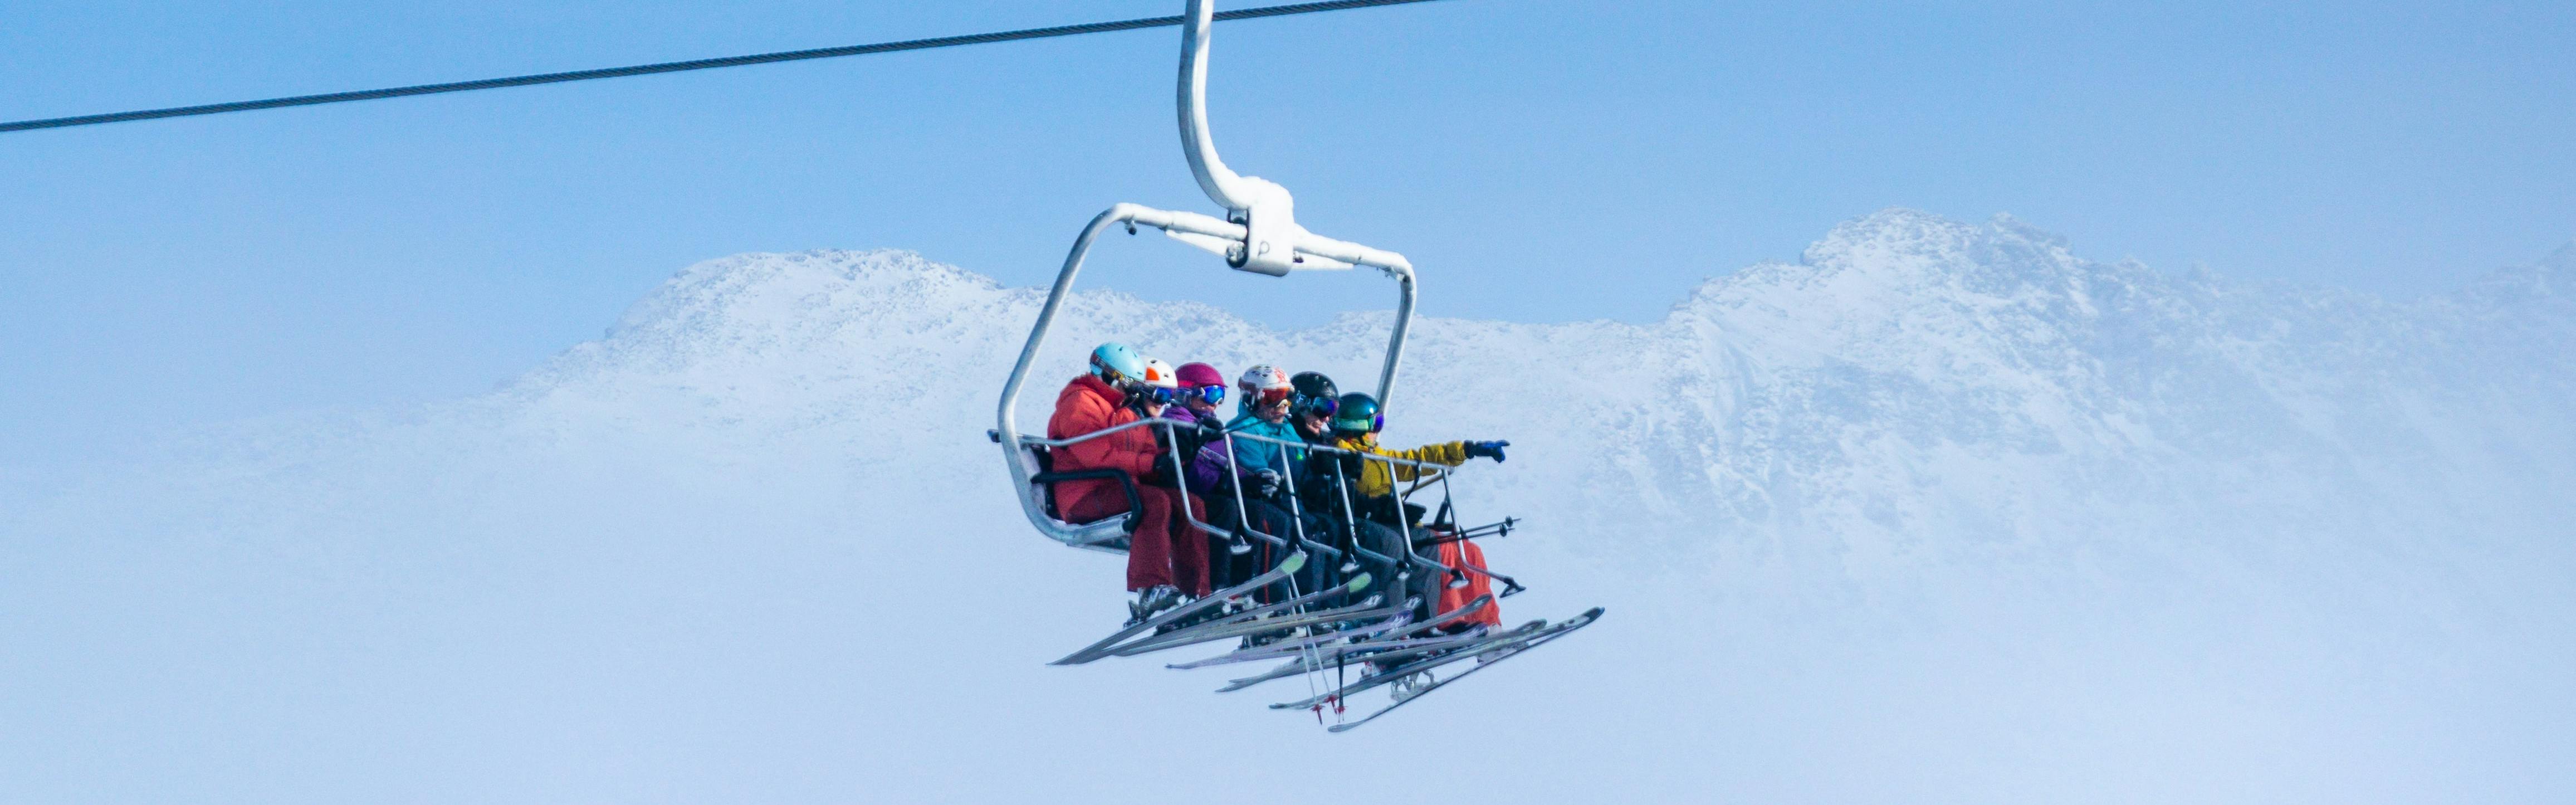 A family on a chairlift. They all have skis on and there is a snowy mountain in the background. 